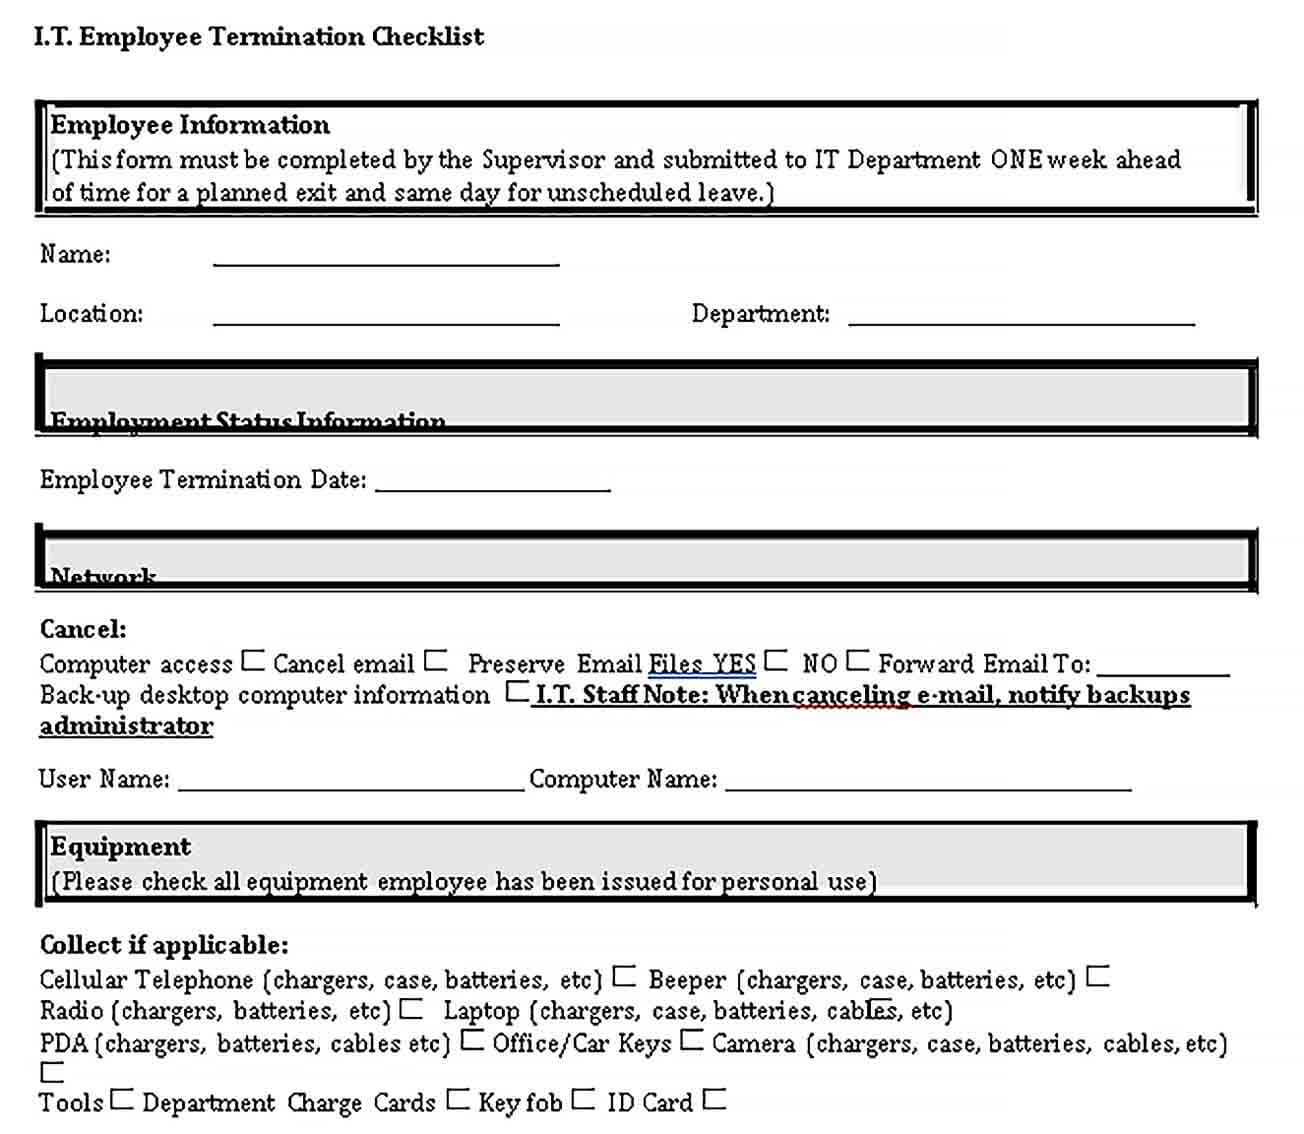 Sample PDF Format of Employee Termination Checklist Template